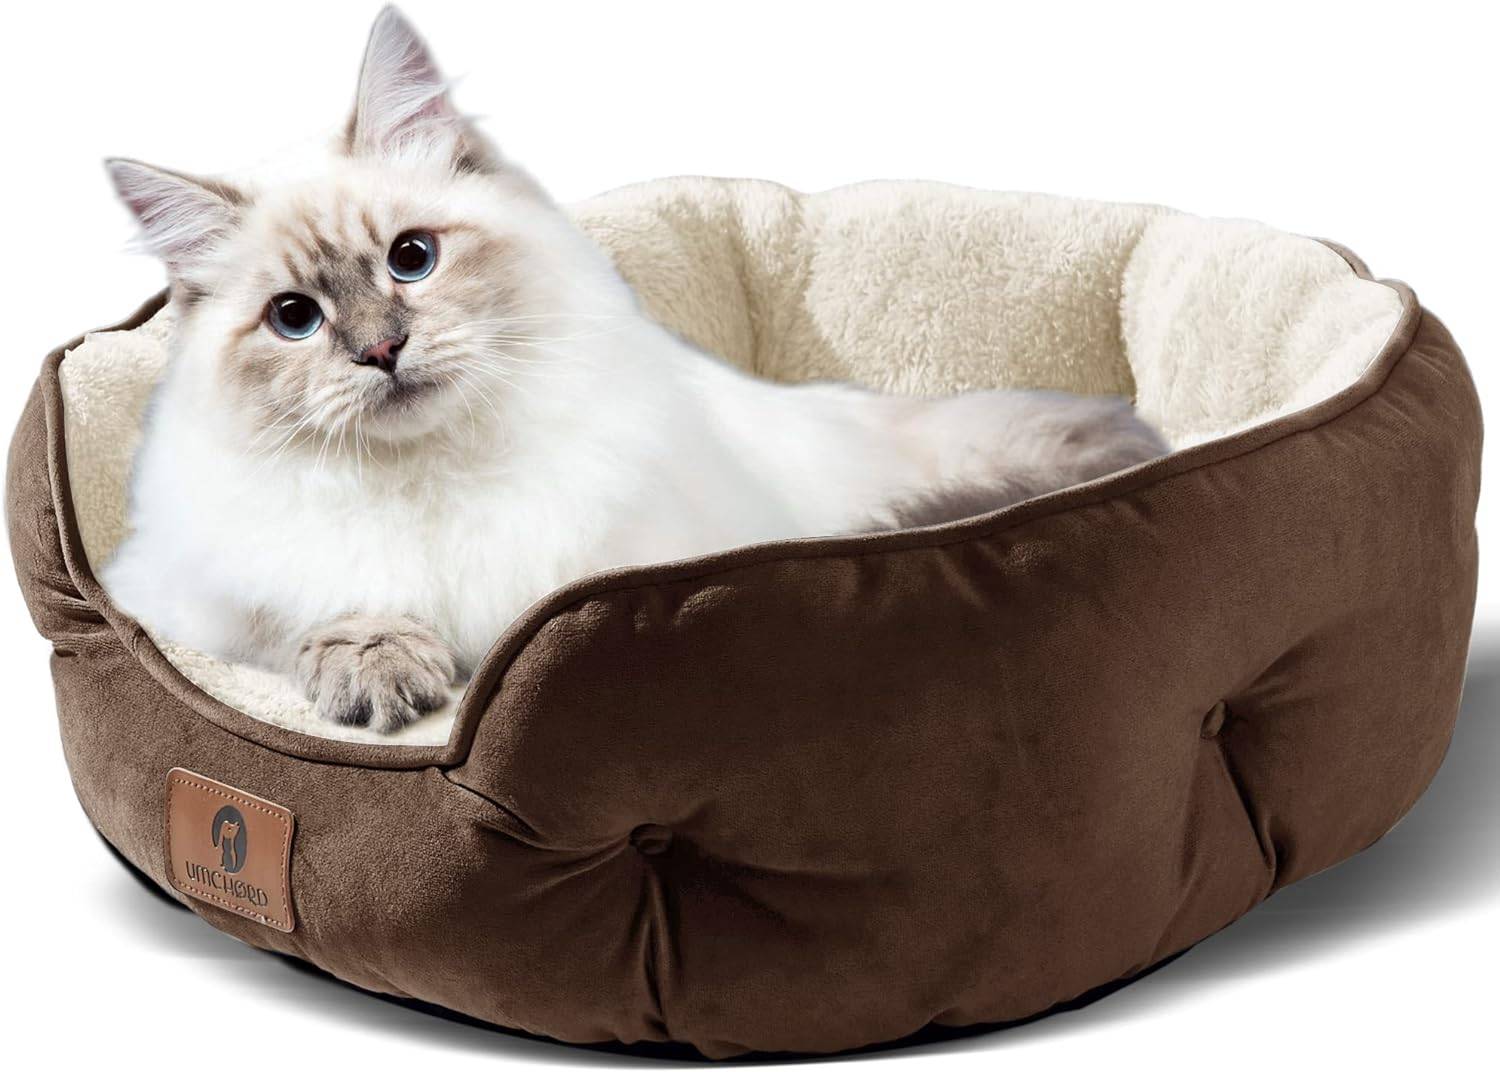 Pet Bed for Small Dogs and Cats - Extra Soft, Machine Washable, Anti-Slip Bottom - Brown, 20 Inches